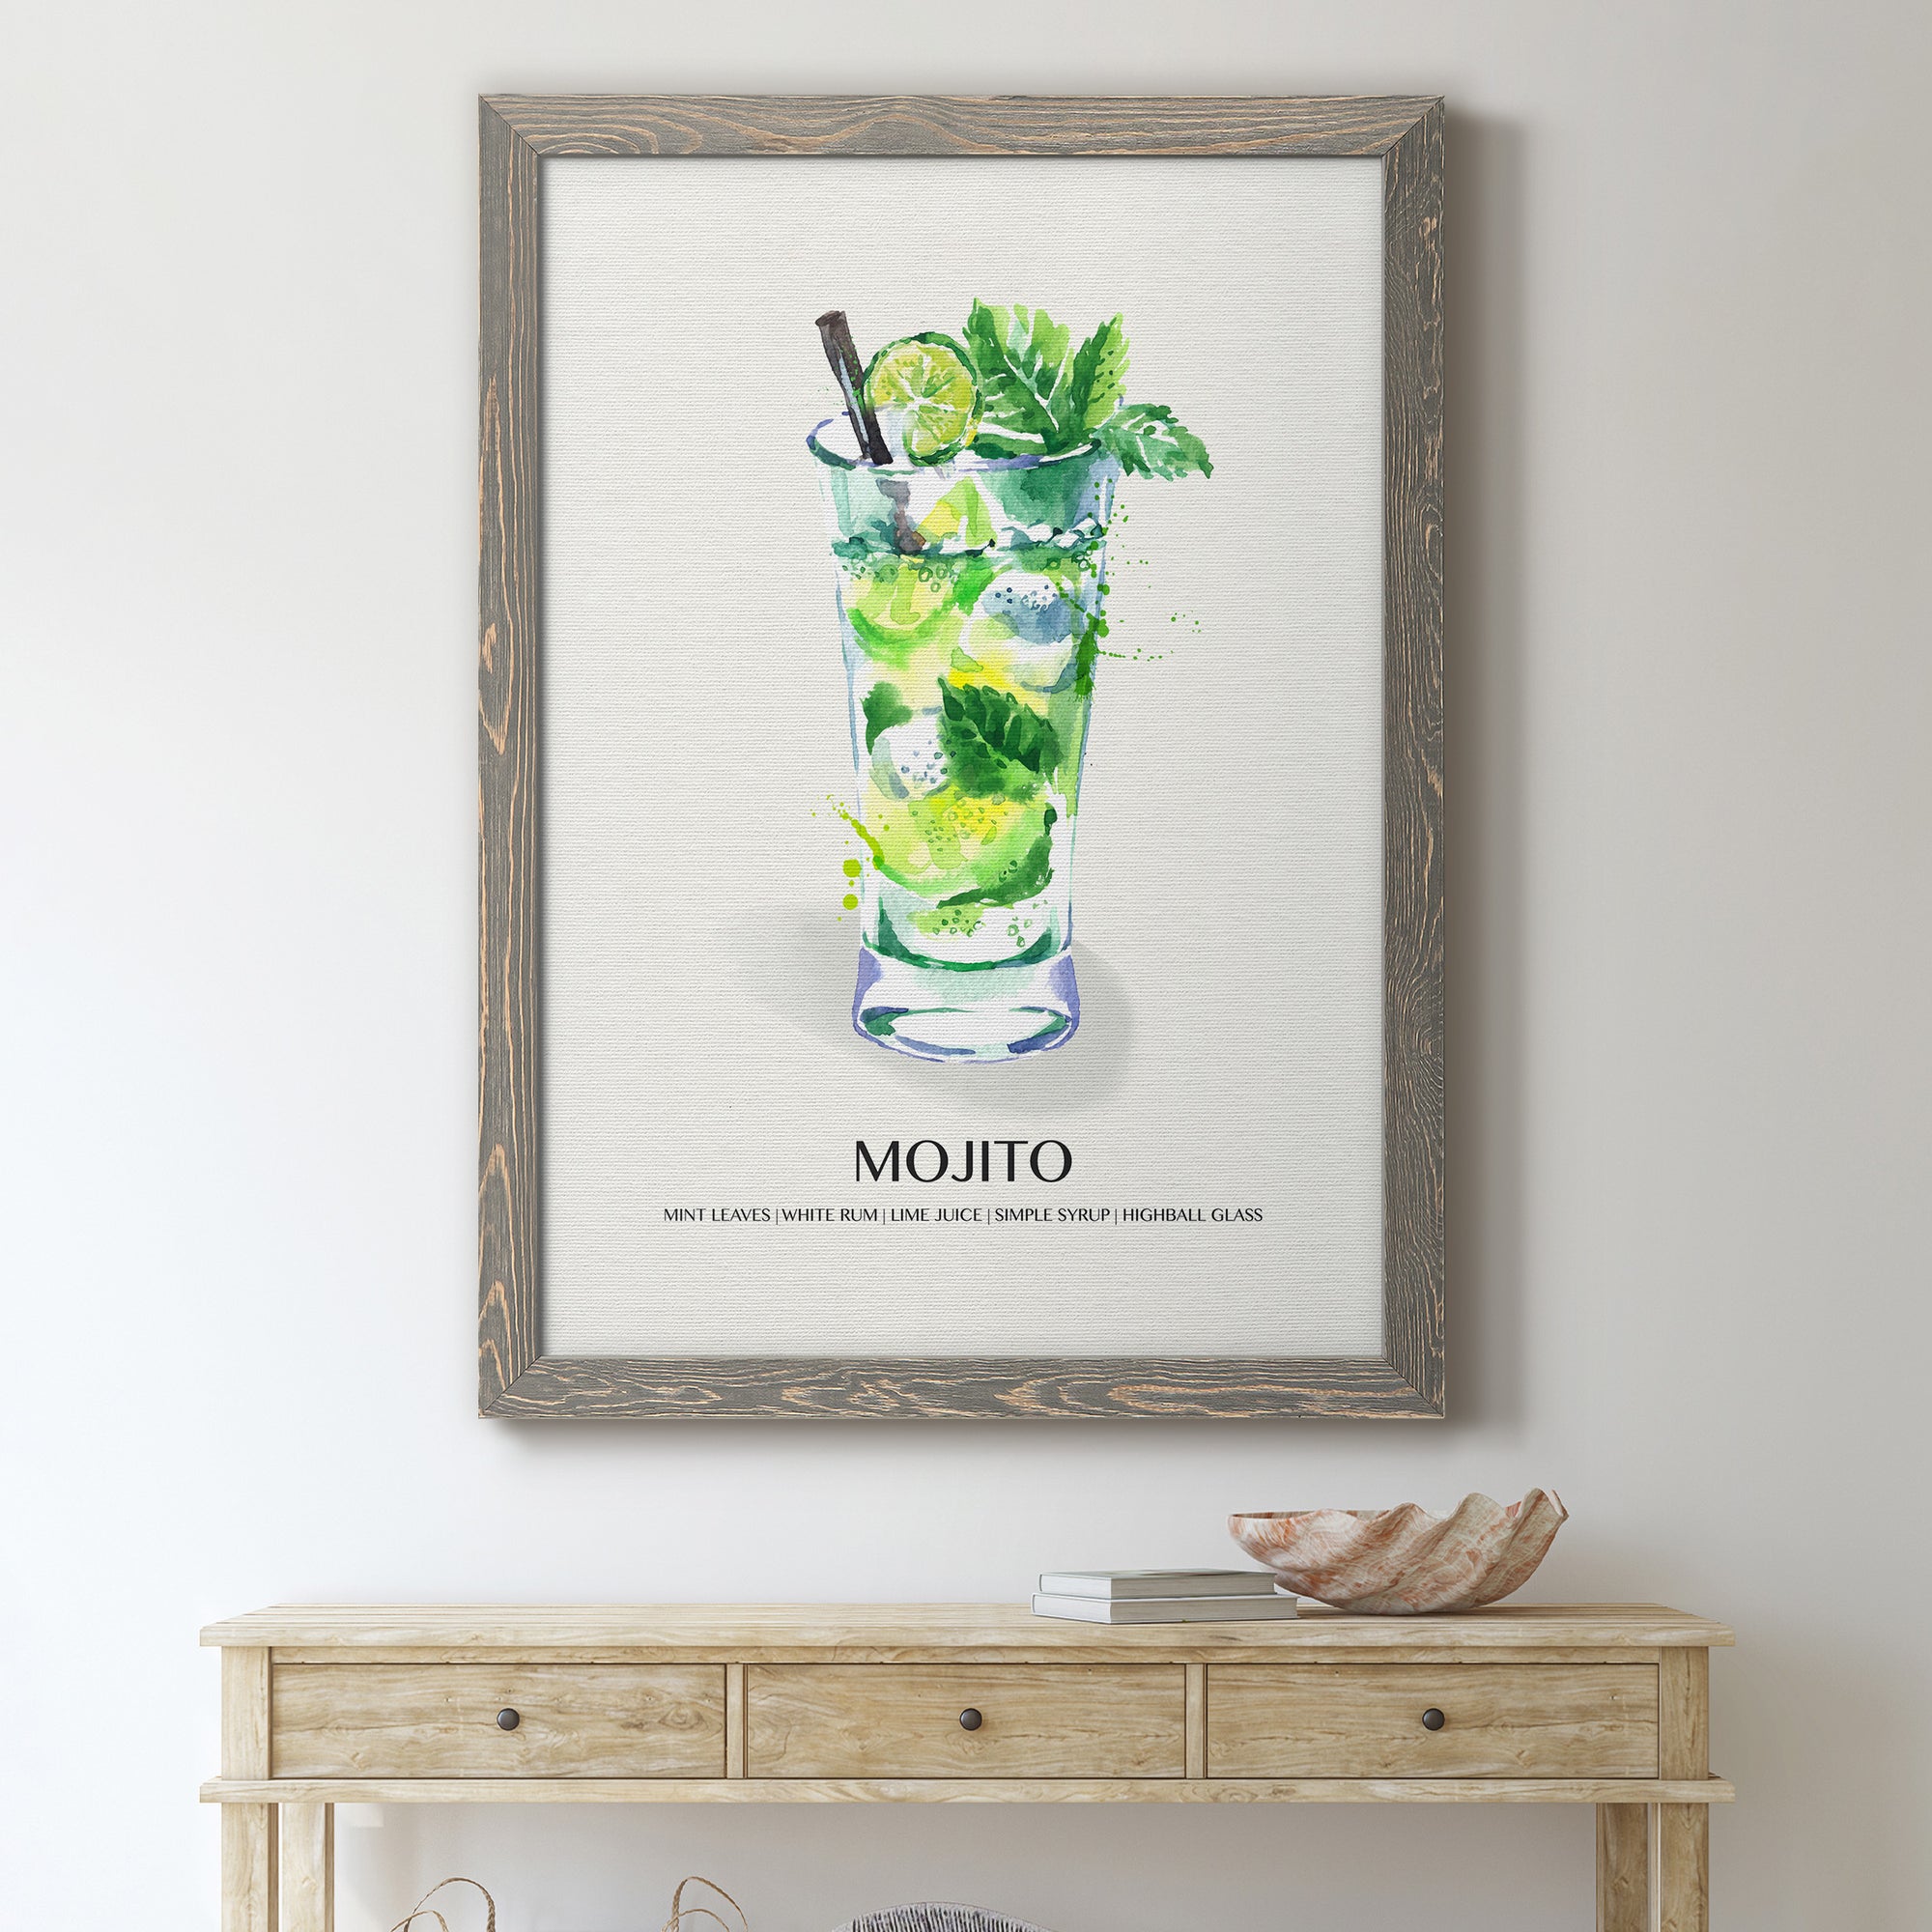 Mojito - Premium Canvas Framed in Barnwood - Ready to Hang